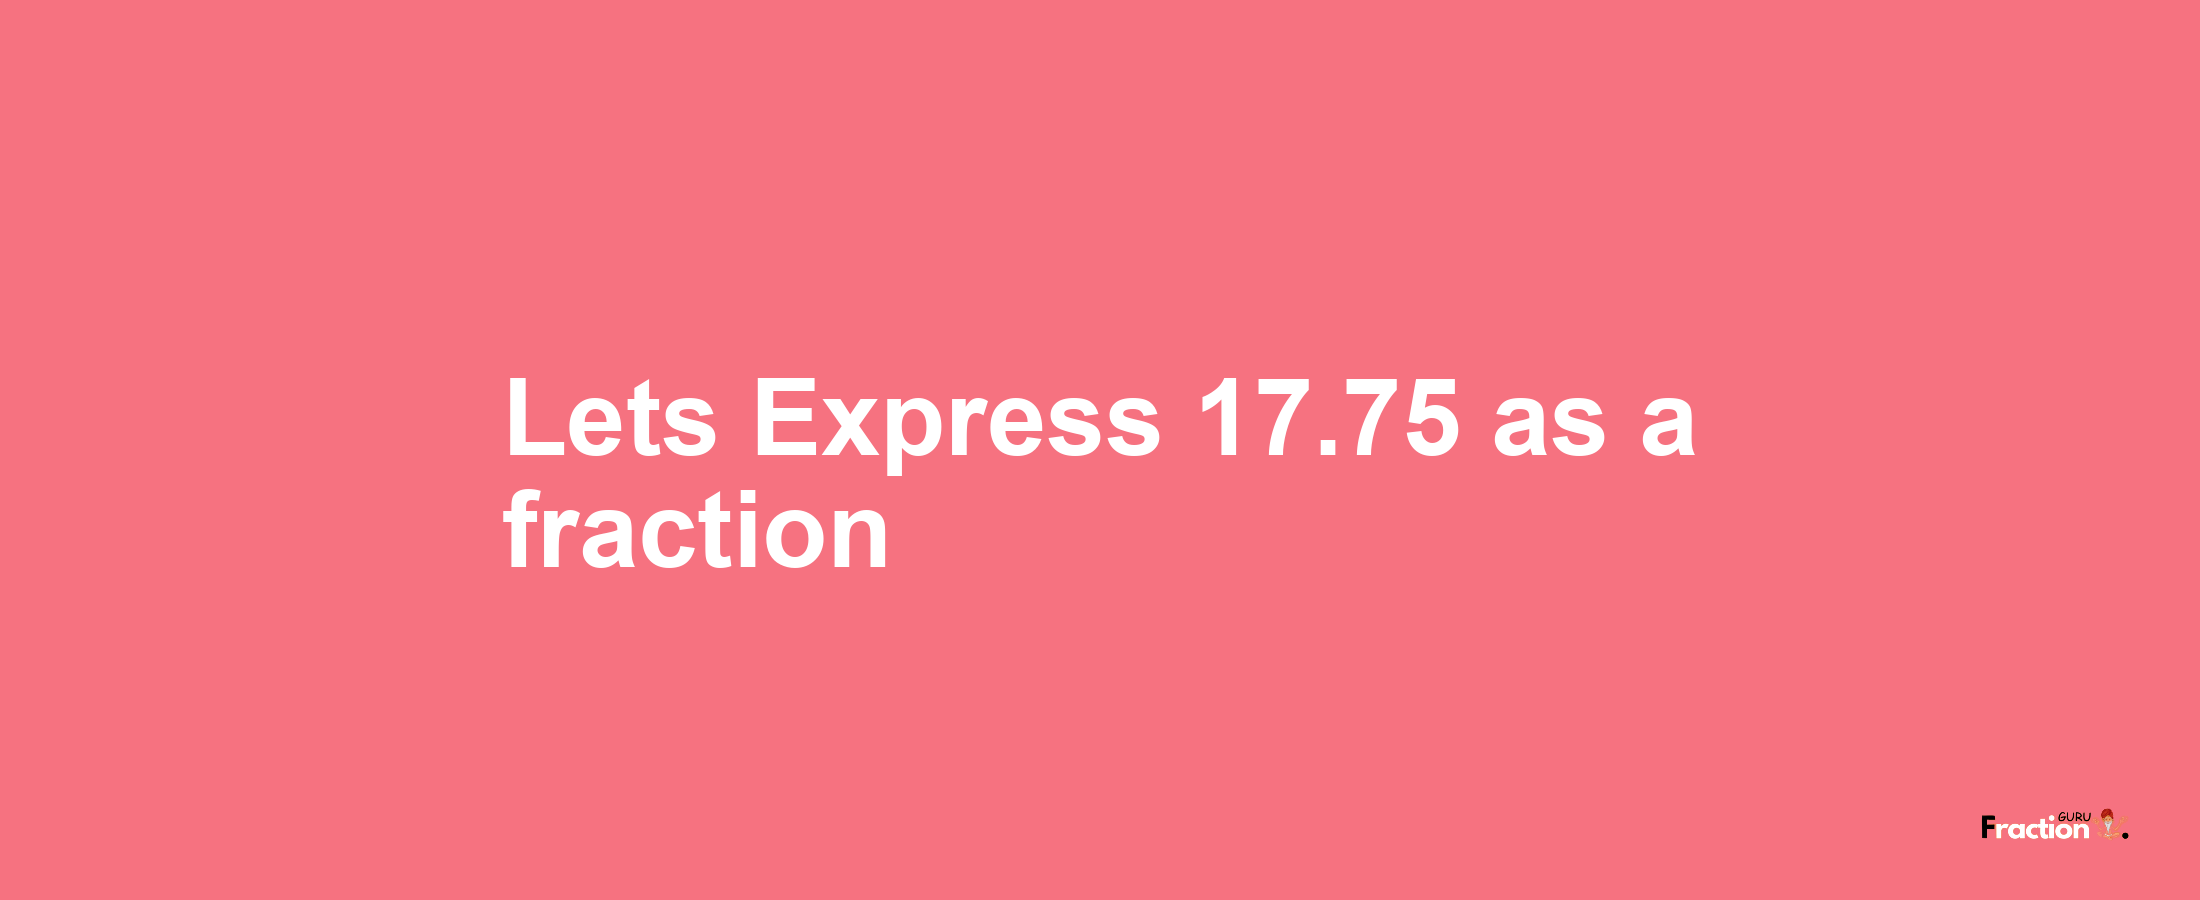 Lets Express 17.75 as afraction